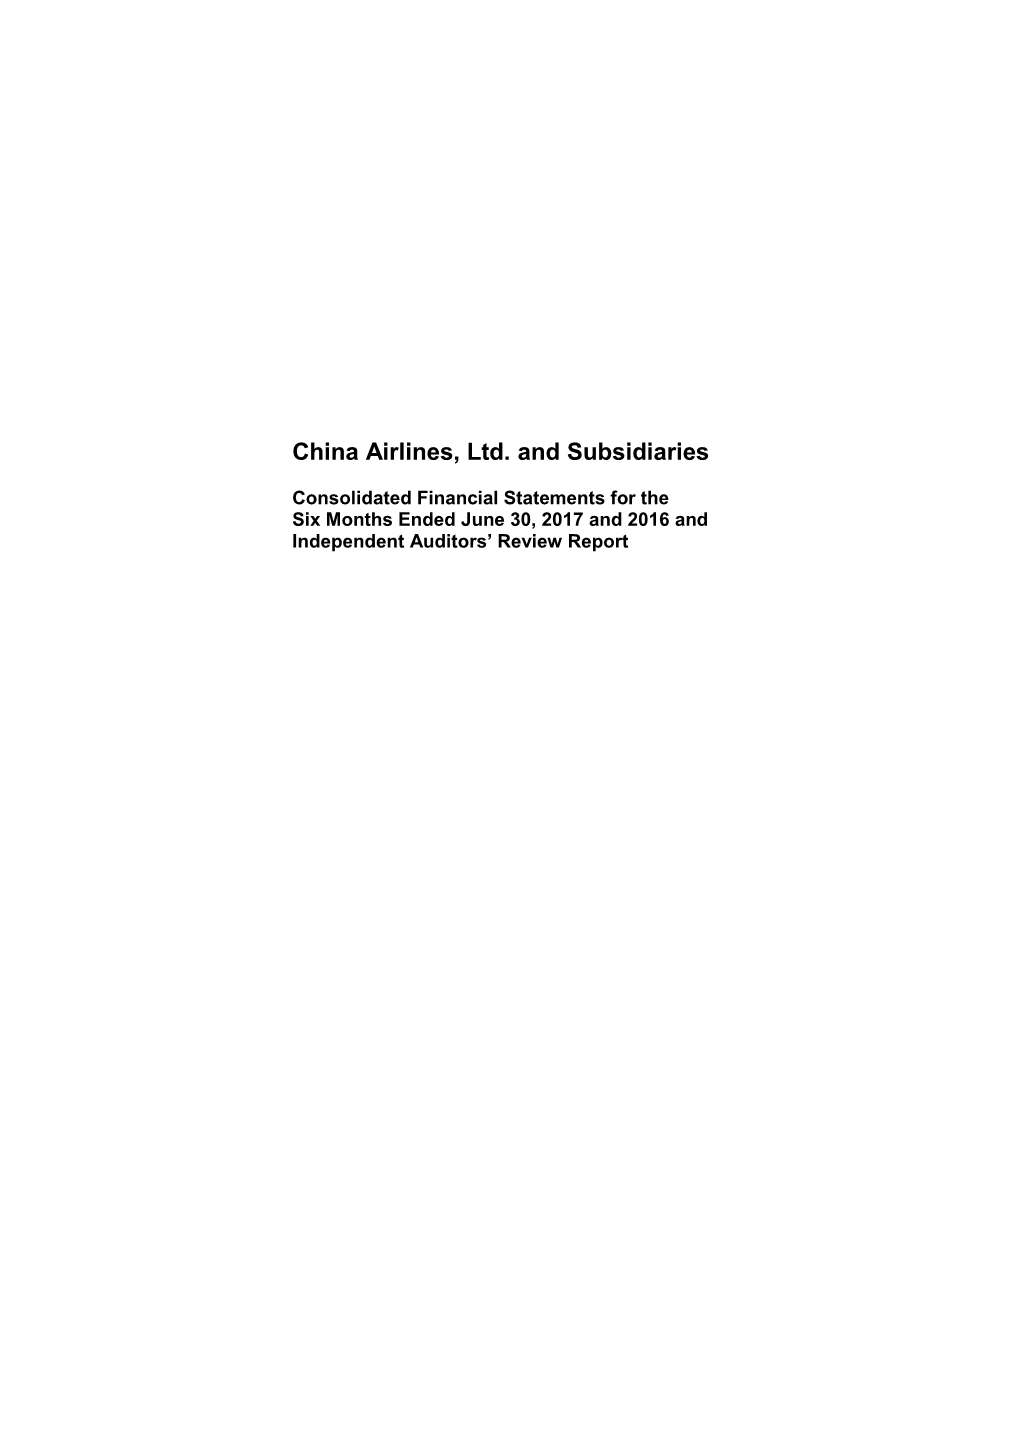 China Airlines, Ltd. and Subsidiaries Consolidated Financial Statements